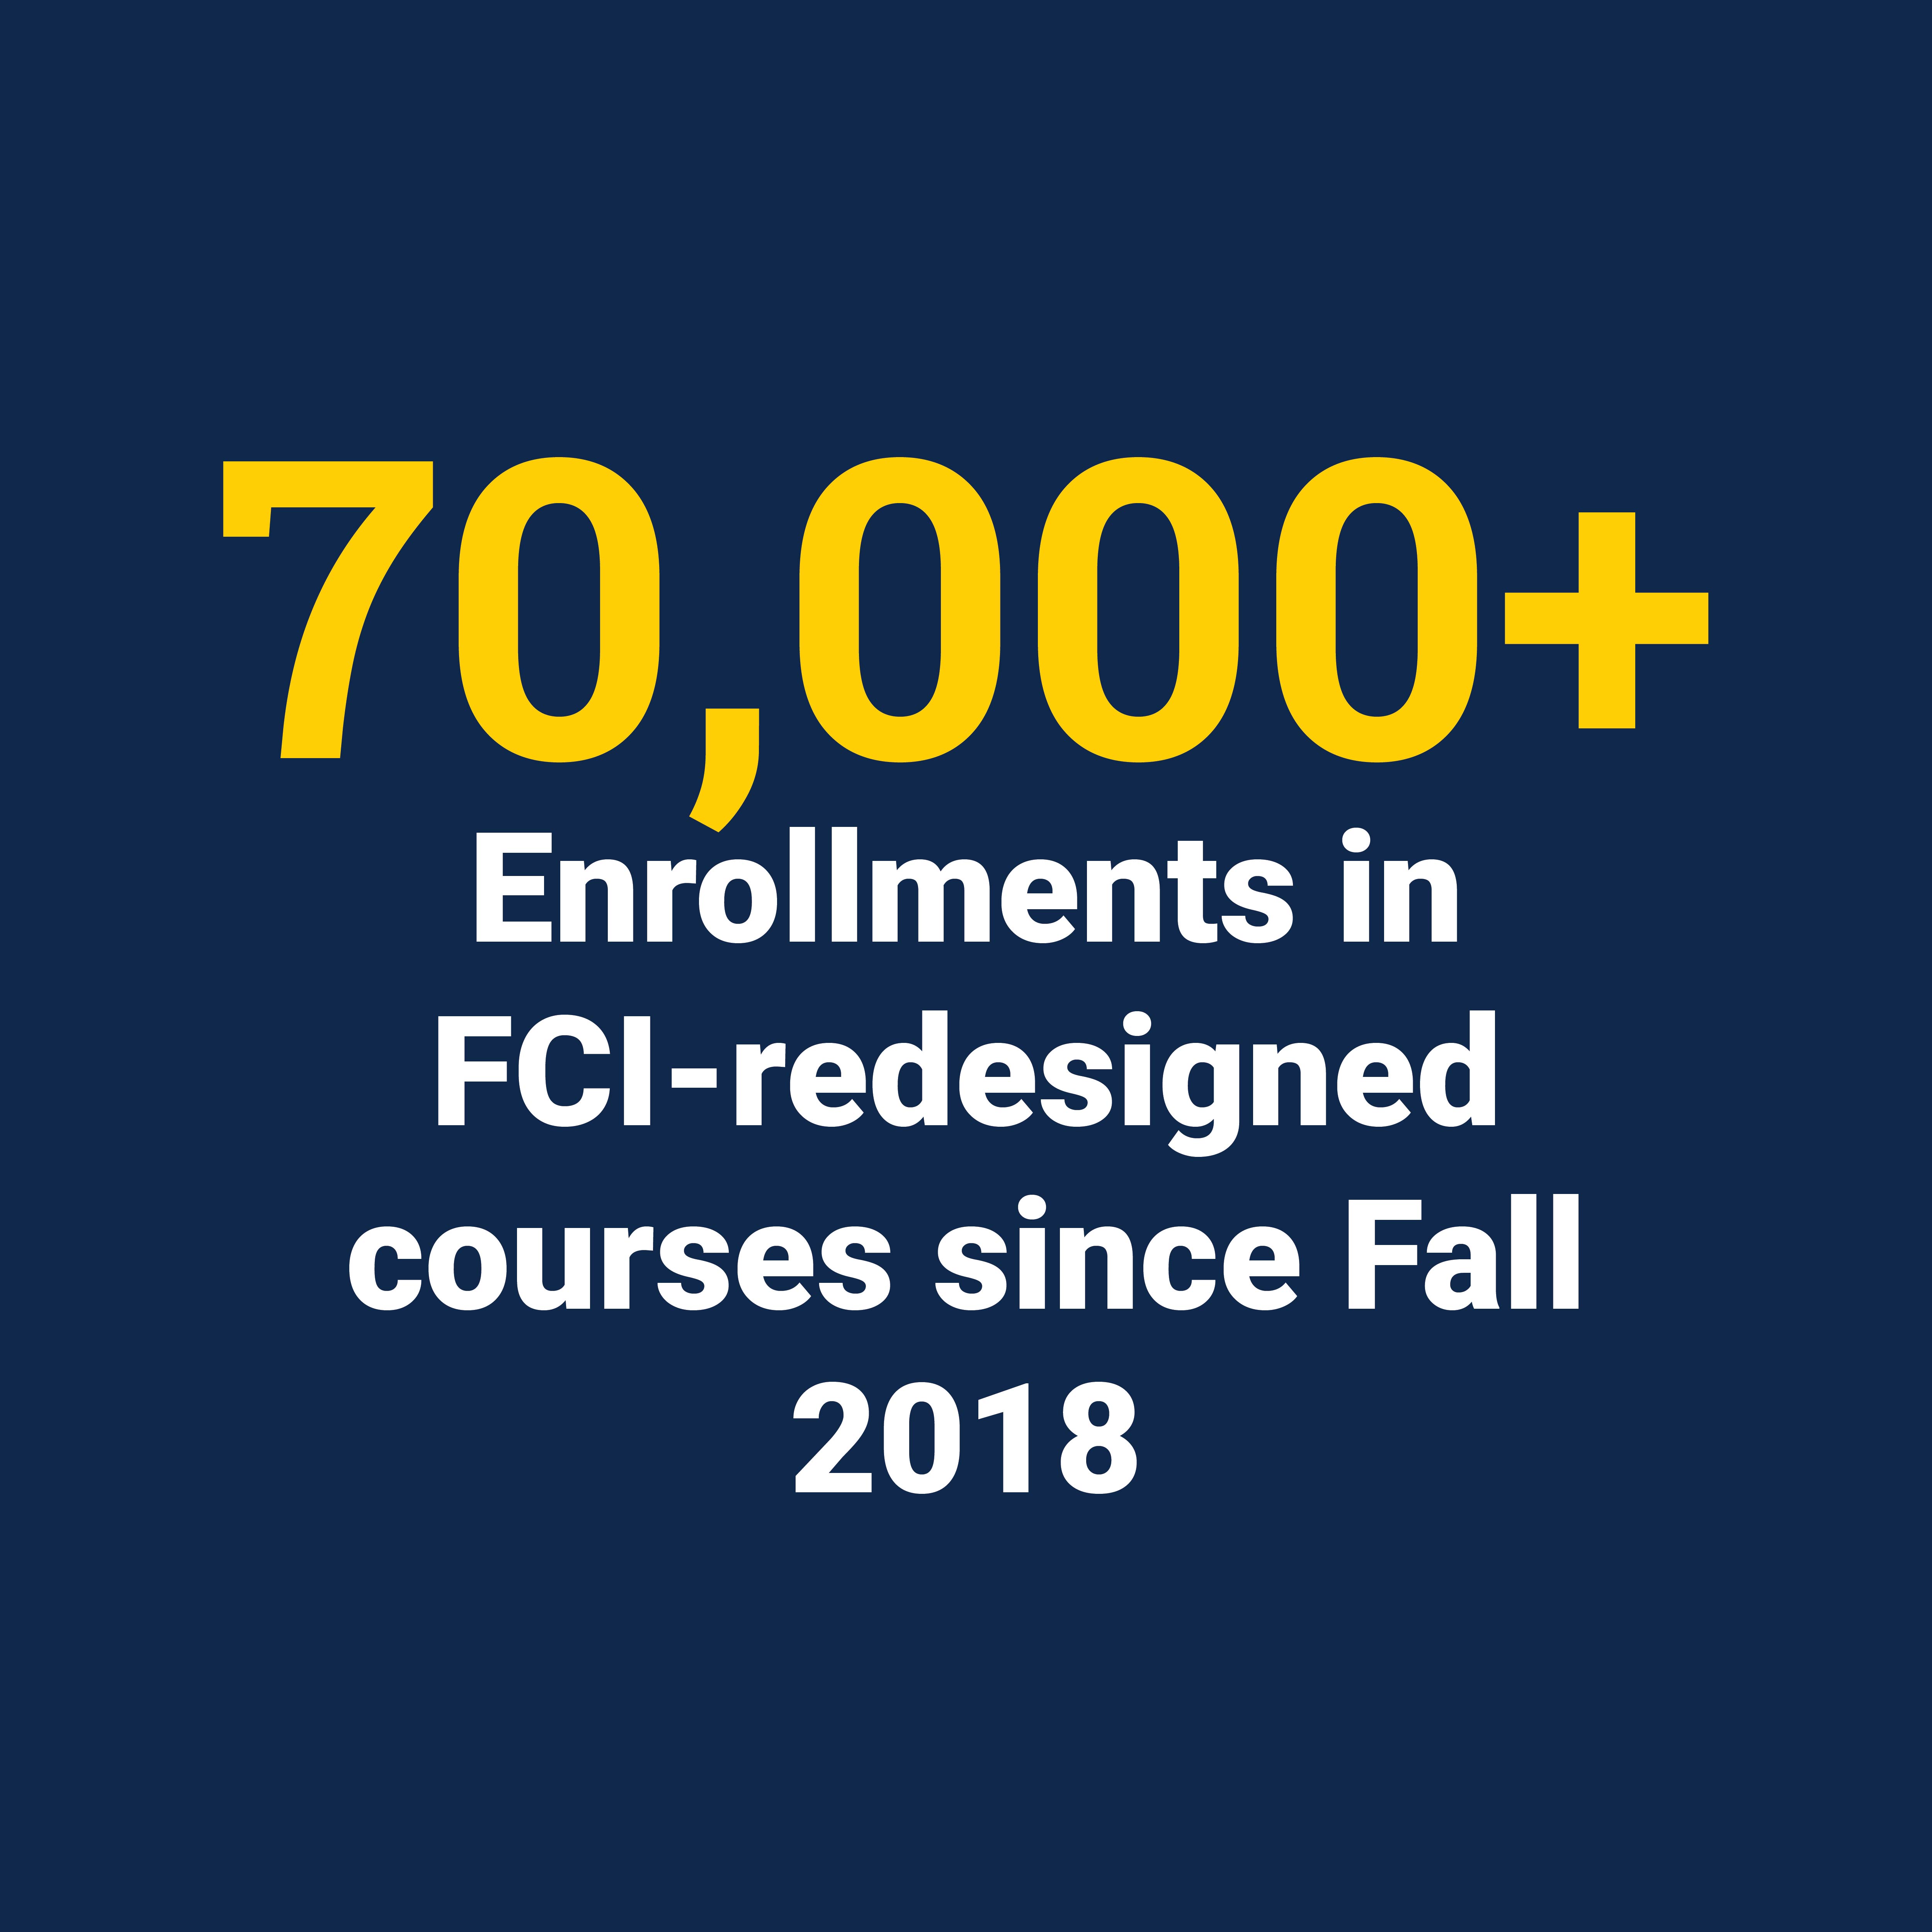 70,000+ Enrollments in FCI-redesigned courses since Fall 2018